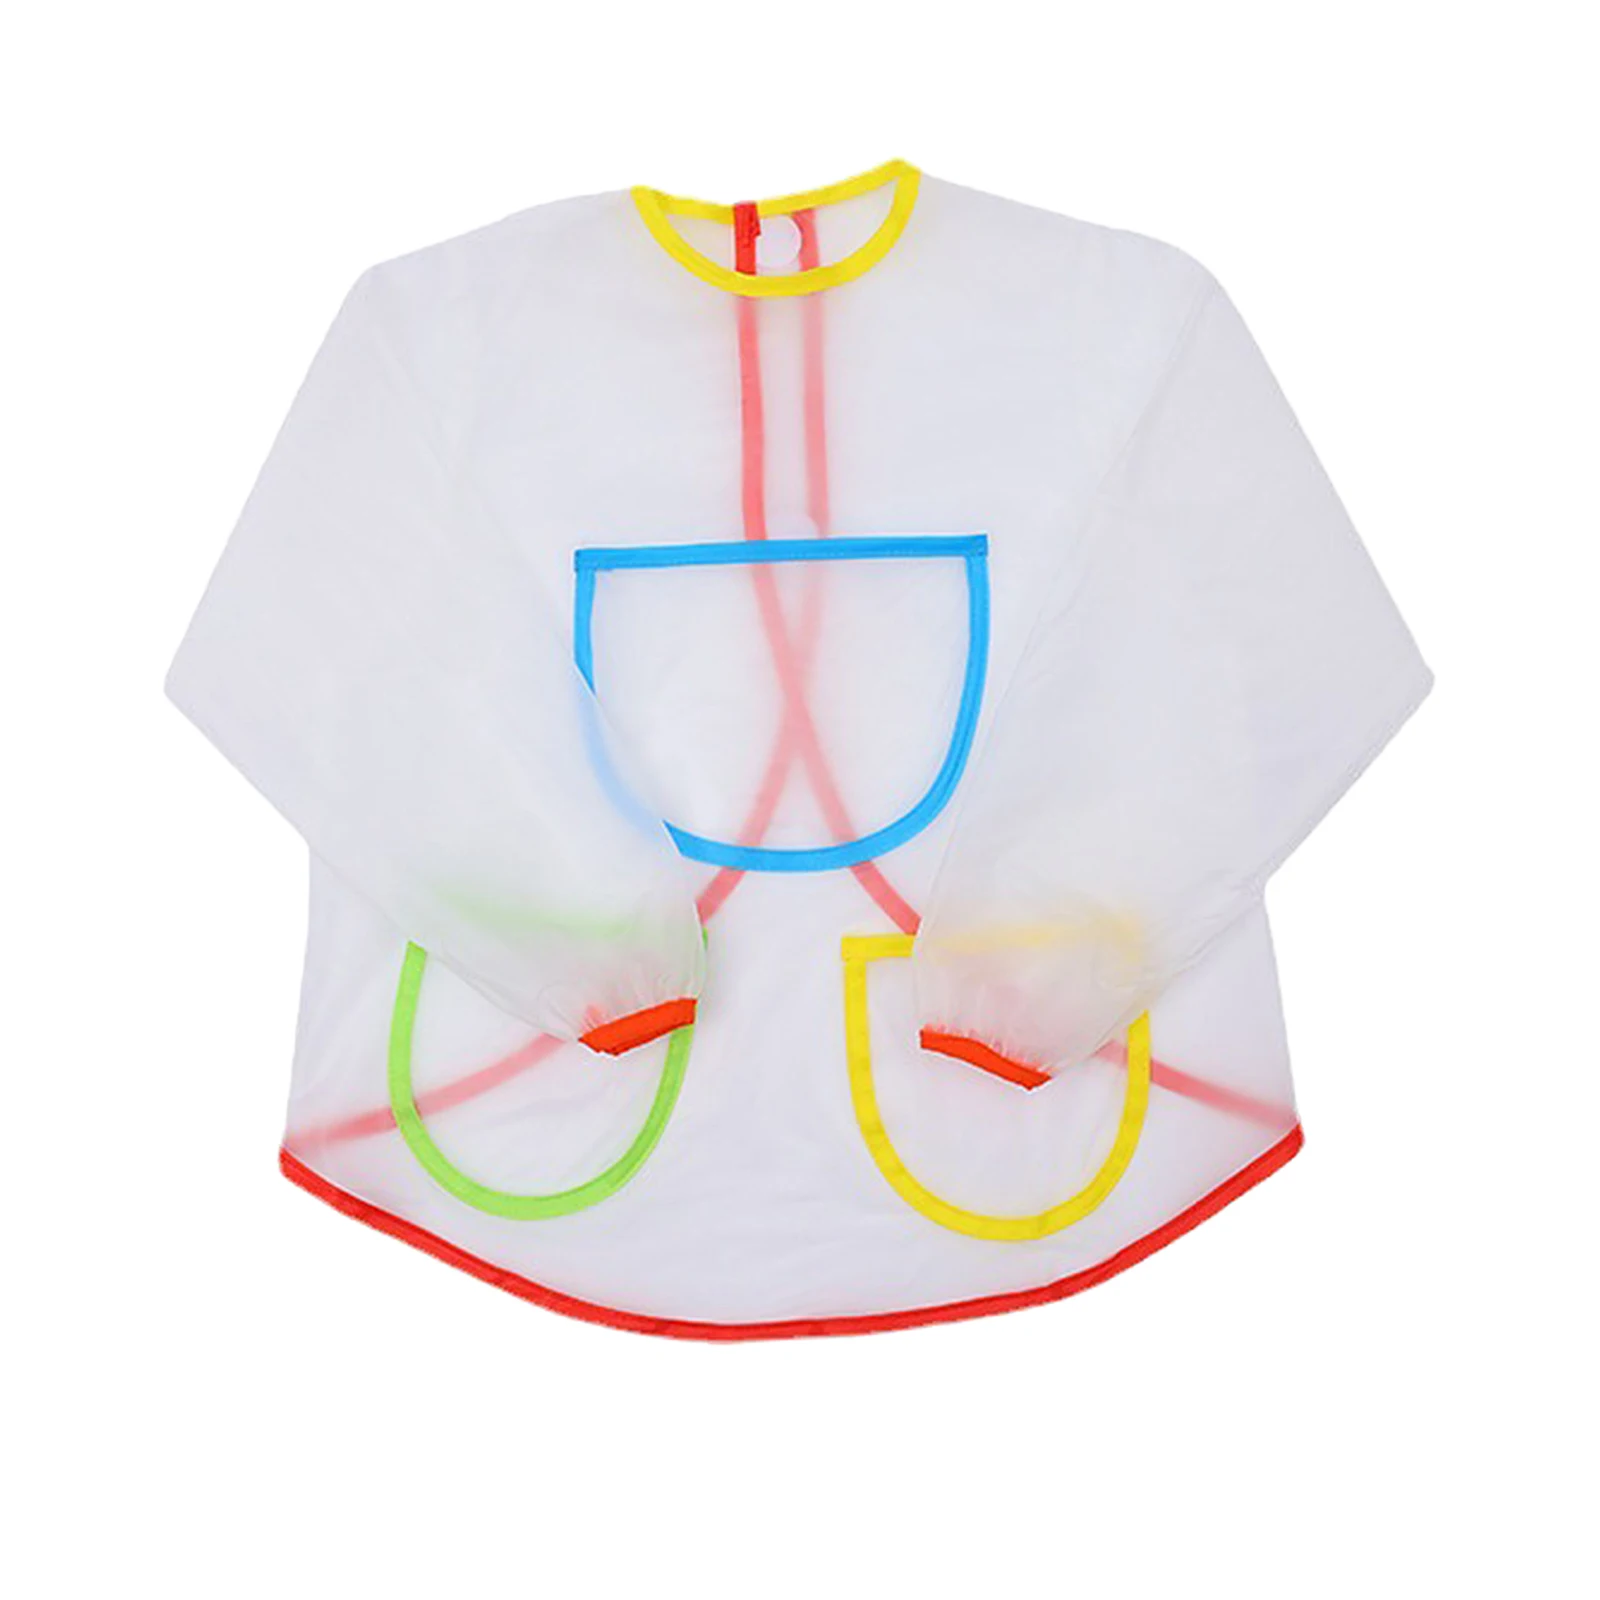 Kids Apron for Painting School Smock for Painting Boy`s and Girl`s Portable Long Sleeve Waterproof Child Art Apron